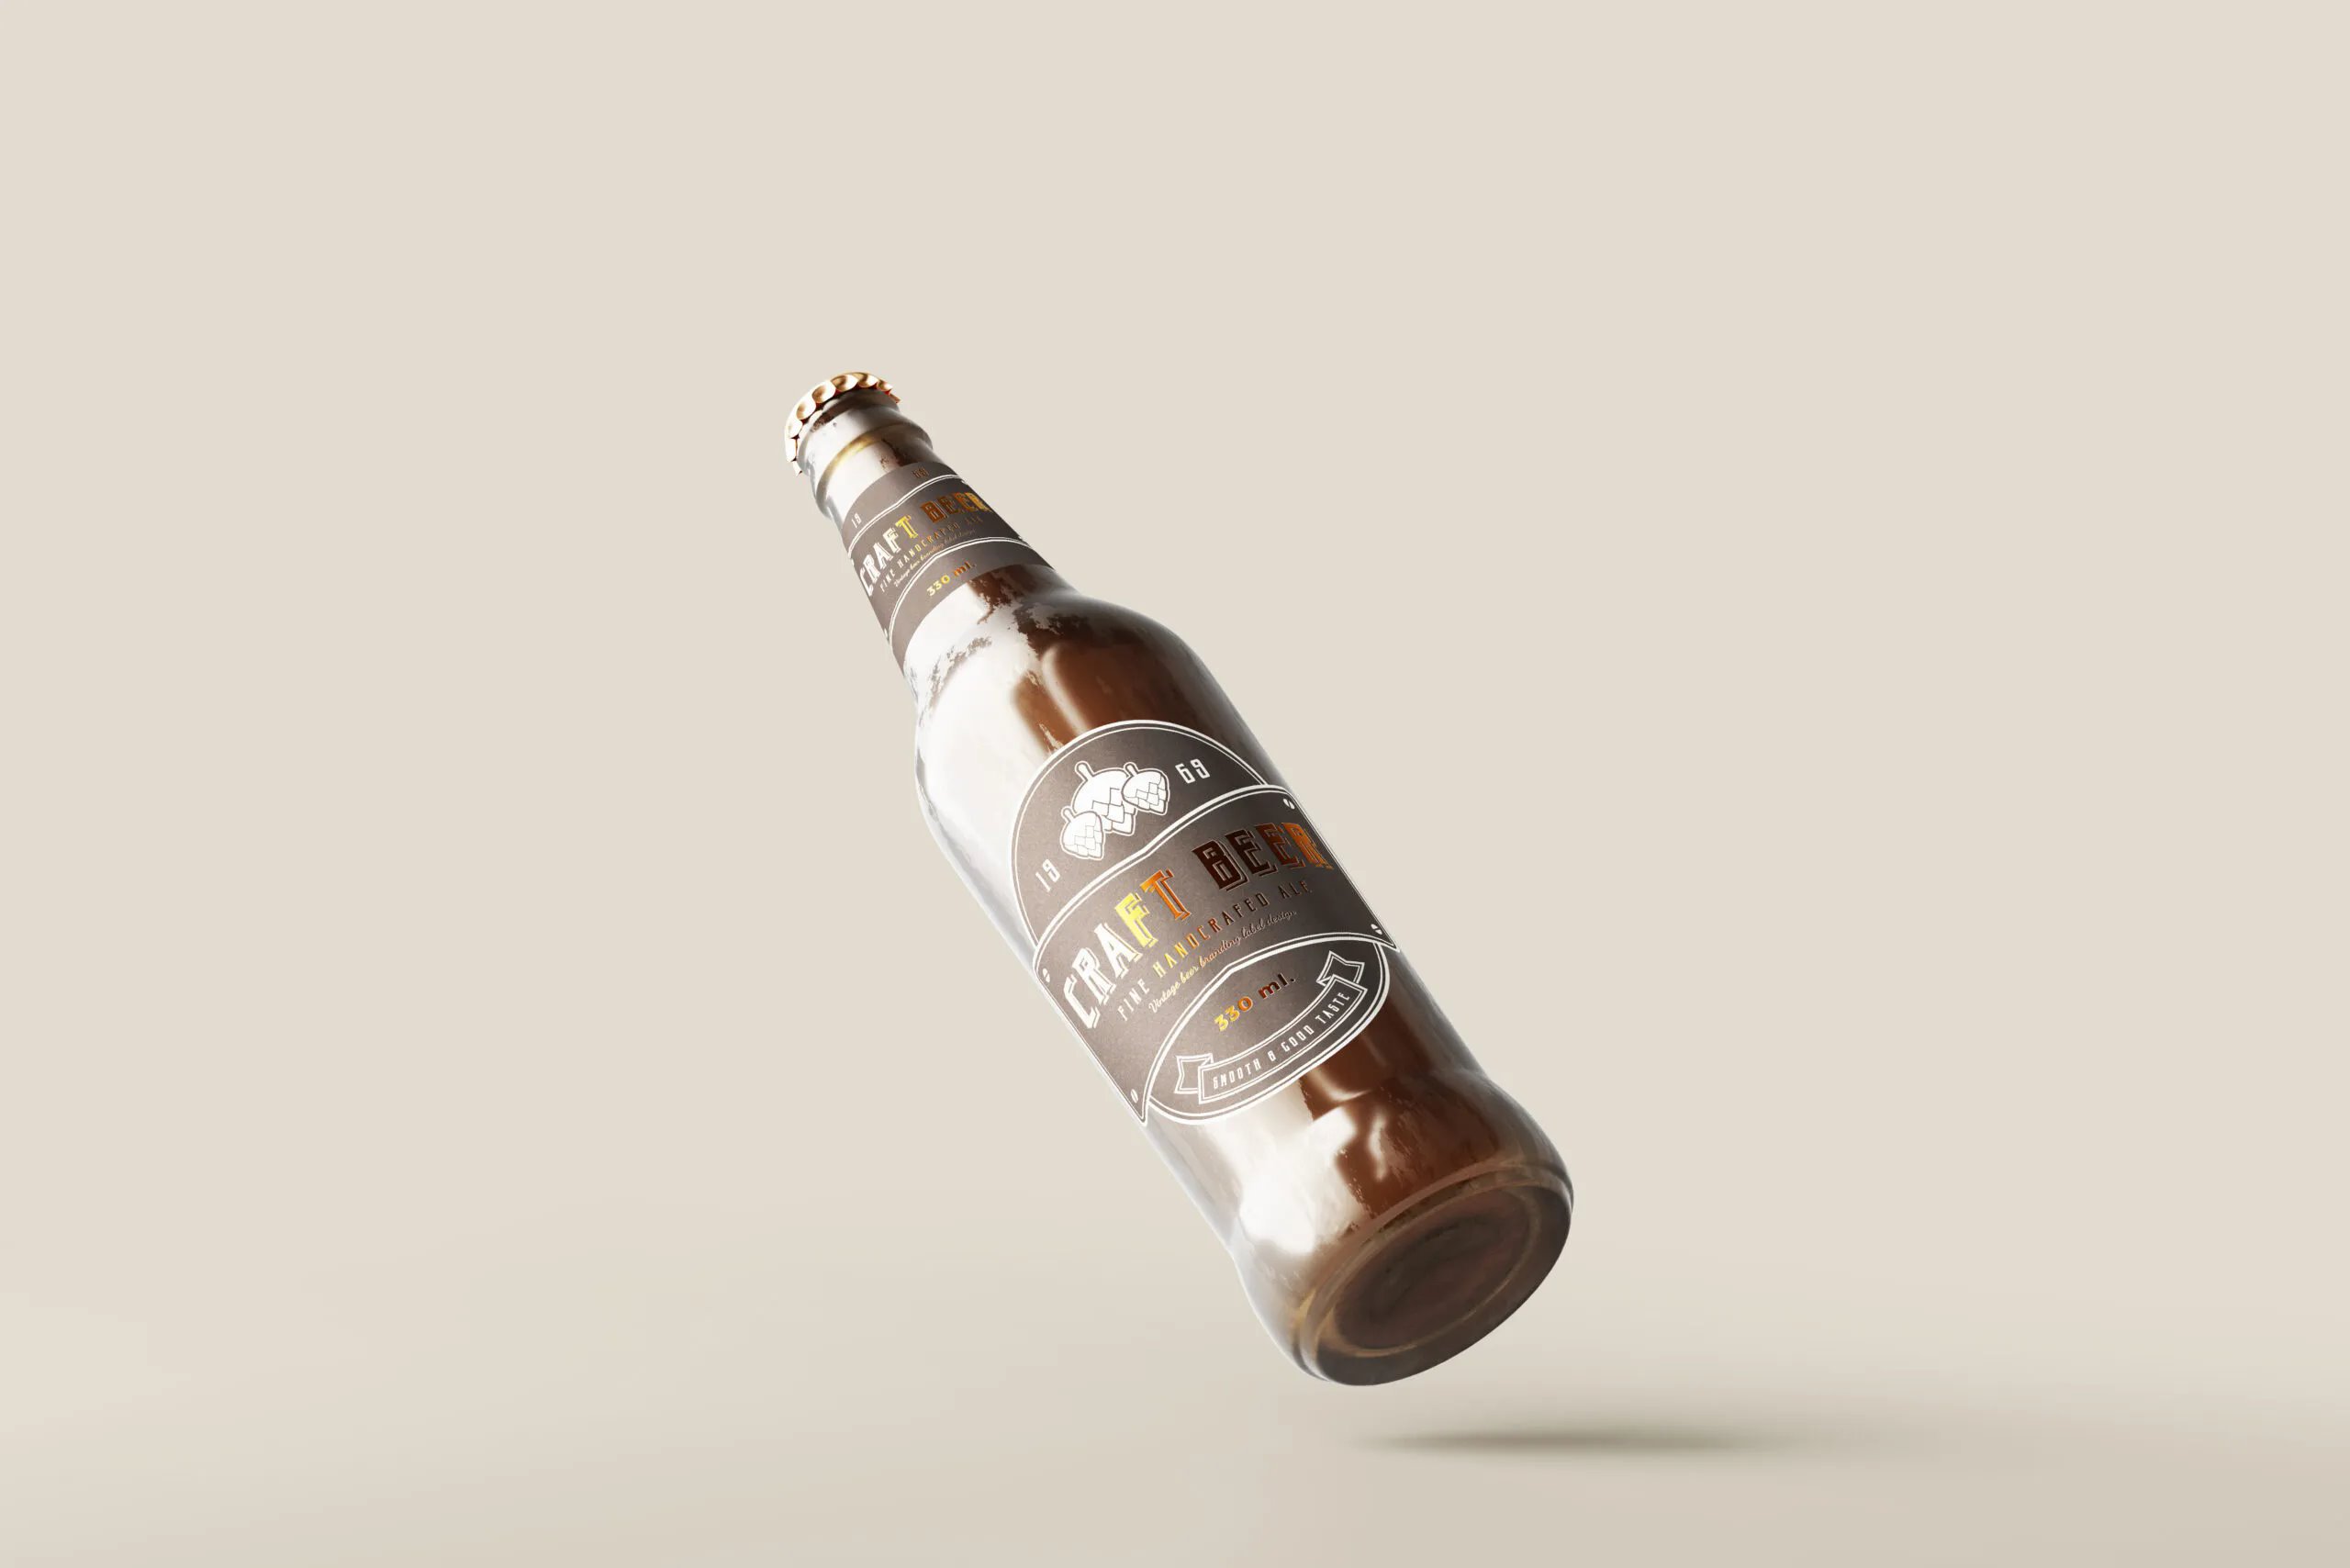 5 Mockups of Beer Bottle in Different Sights FREE PSD